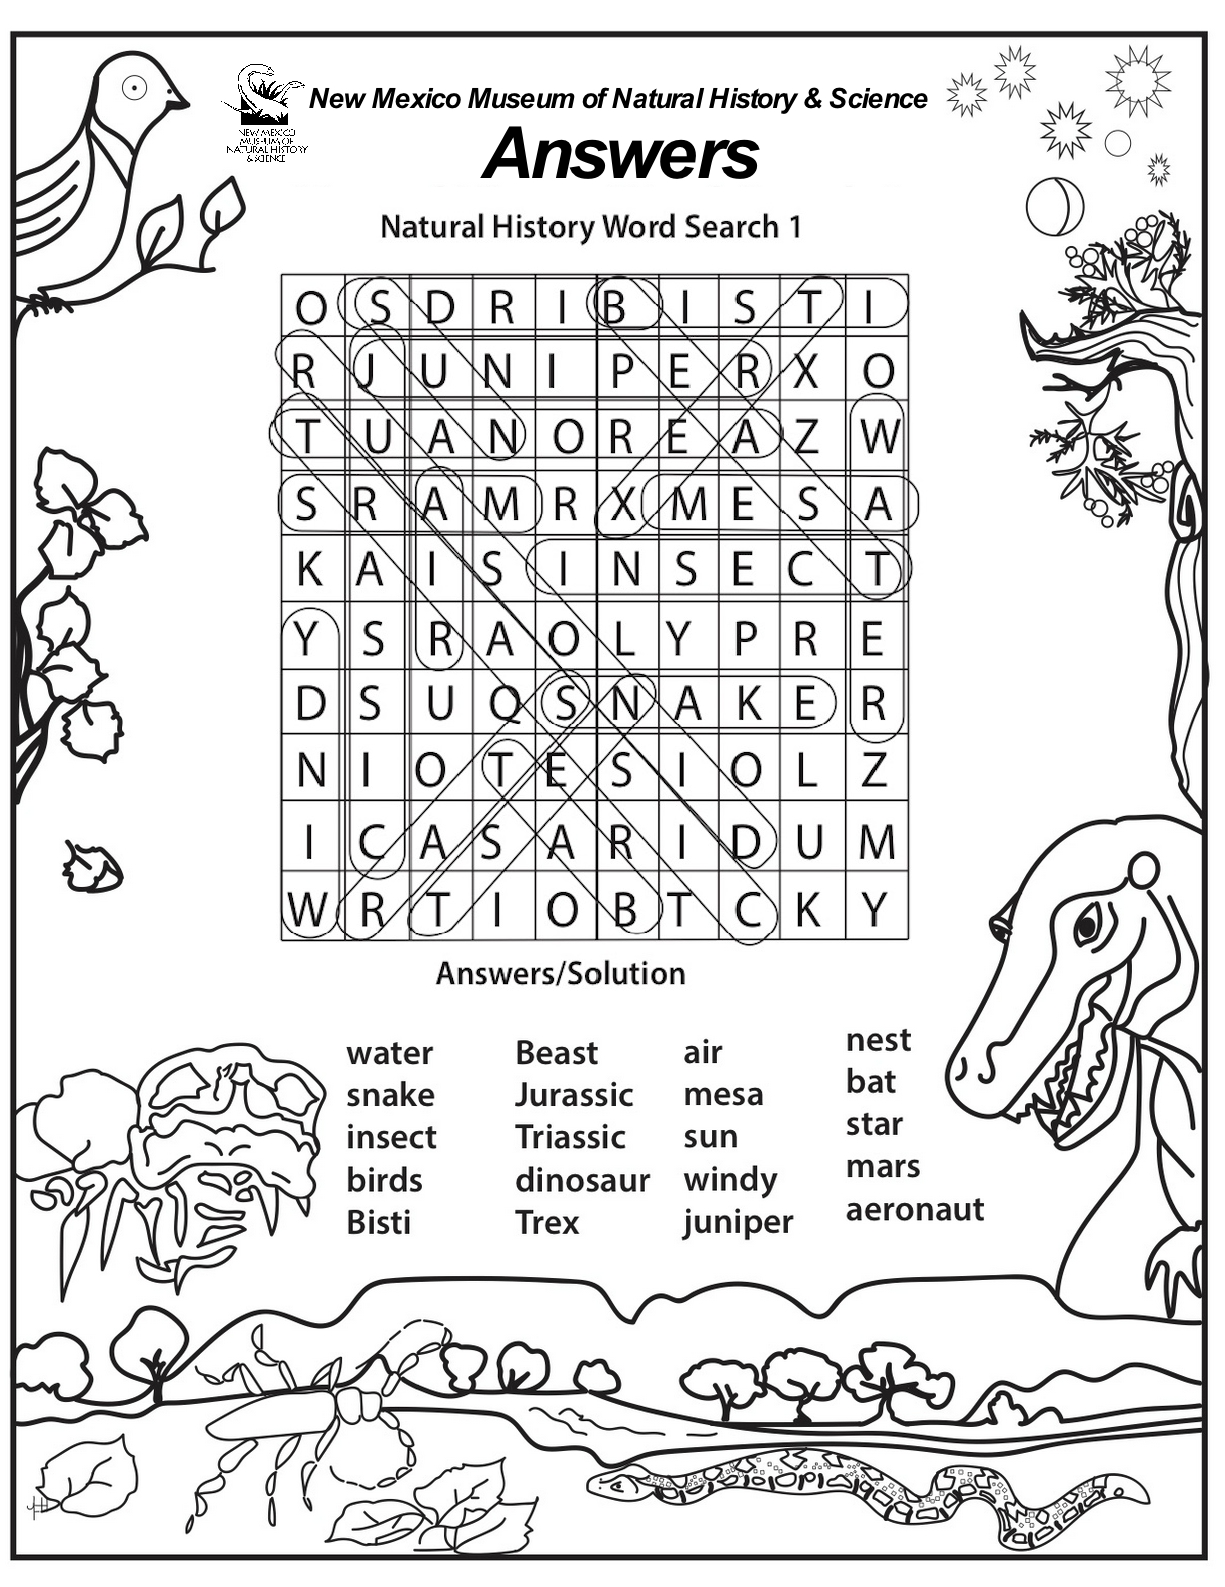 Answer Key for Natural History Word Search